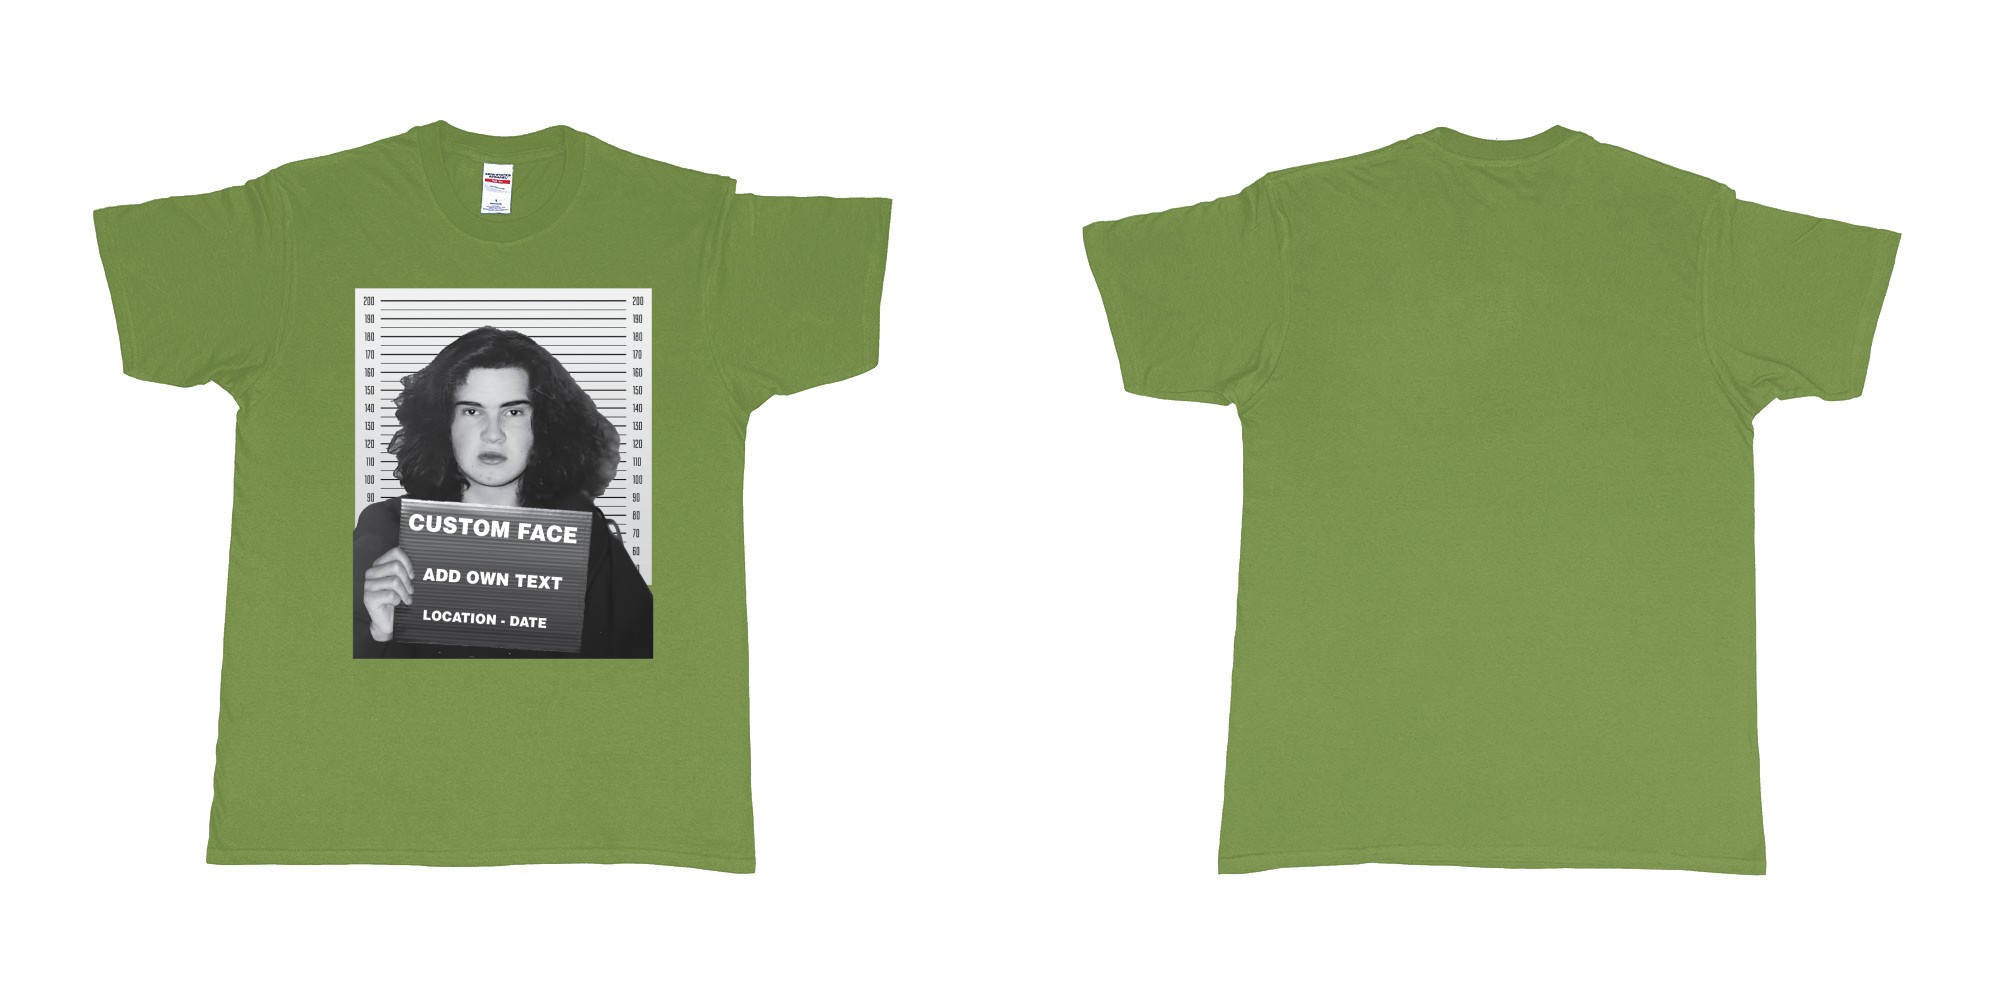 Custom tshirt design jimmy carr arrested bali mugshot in fabric color military-green choice your own text made in Bali by The Pirate Way